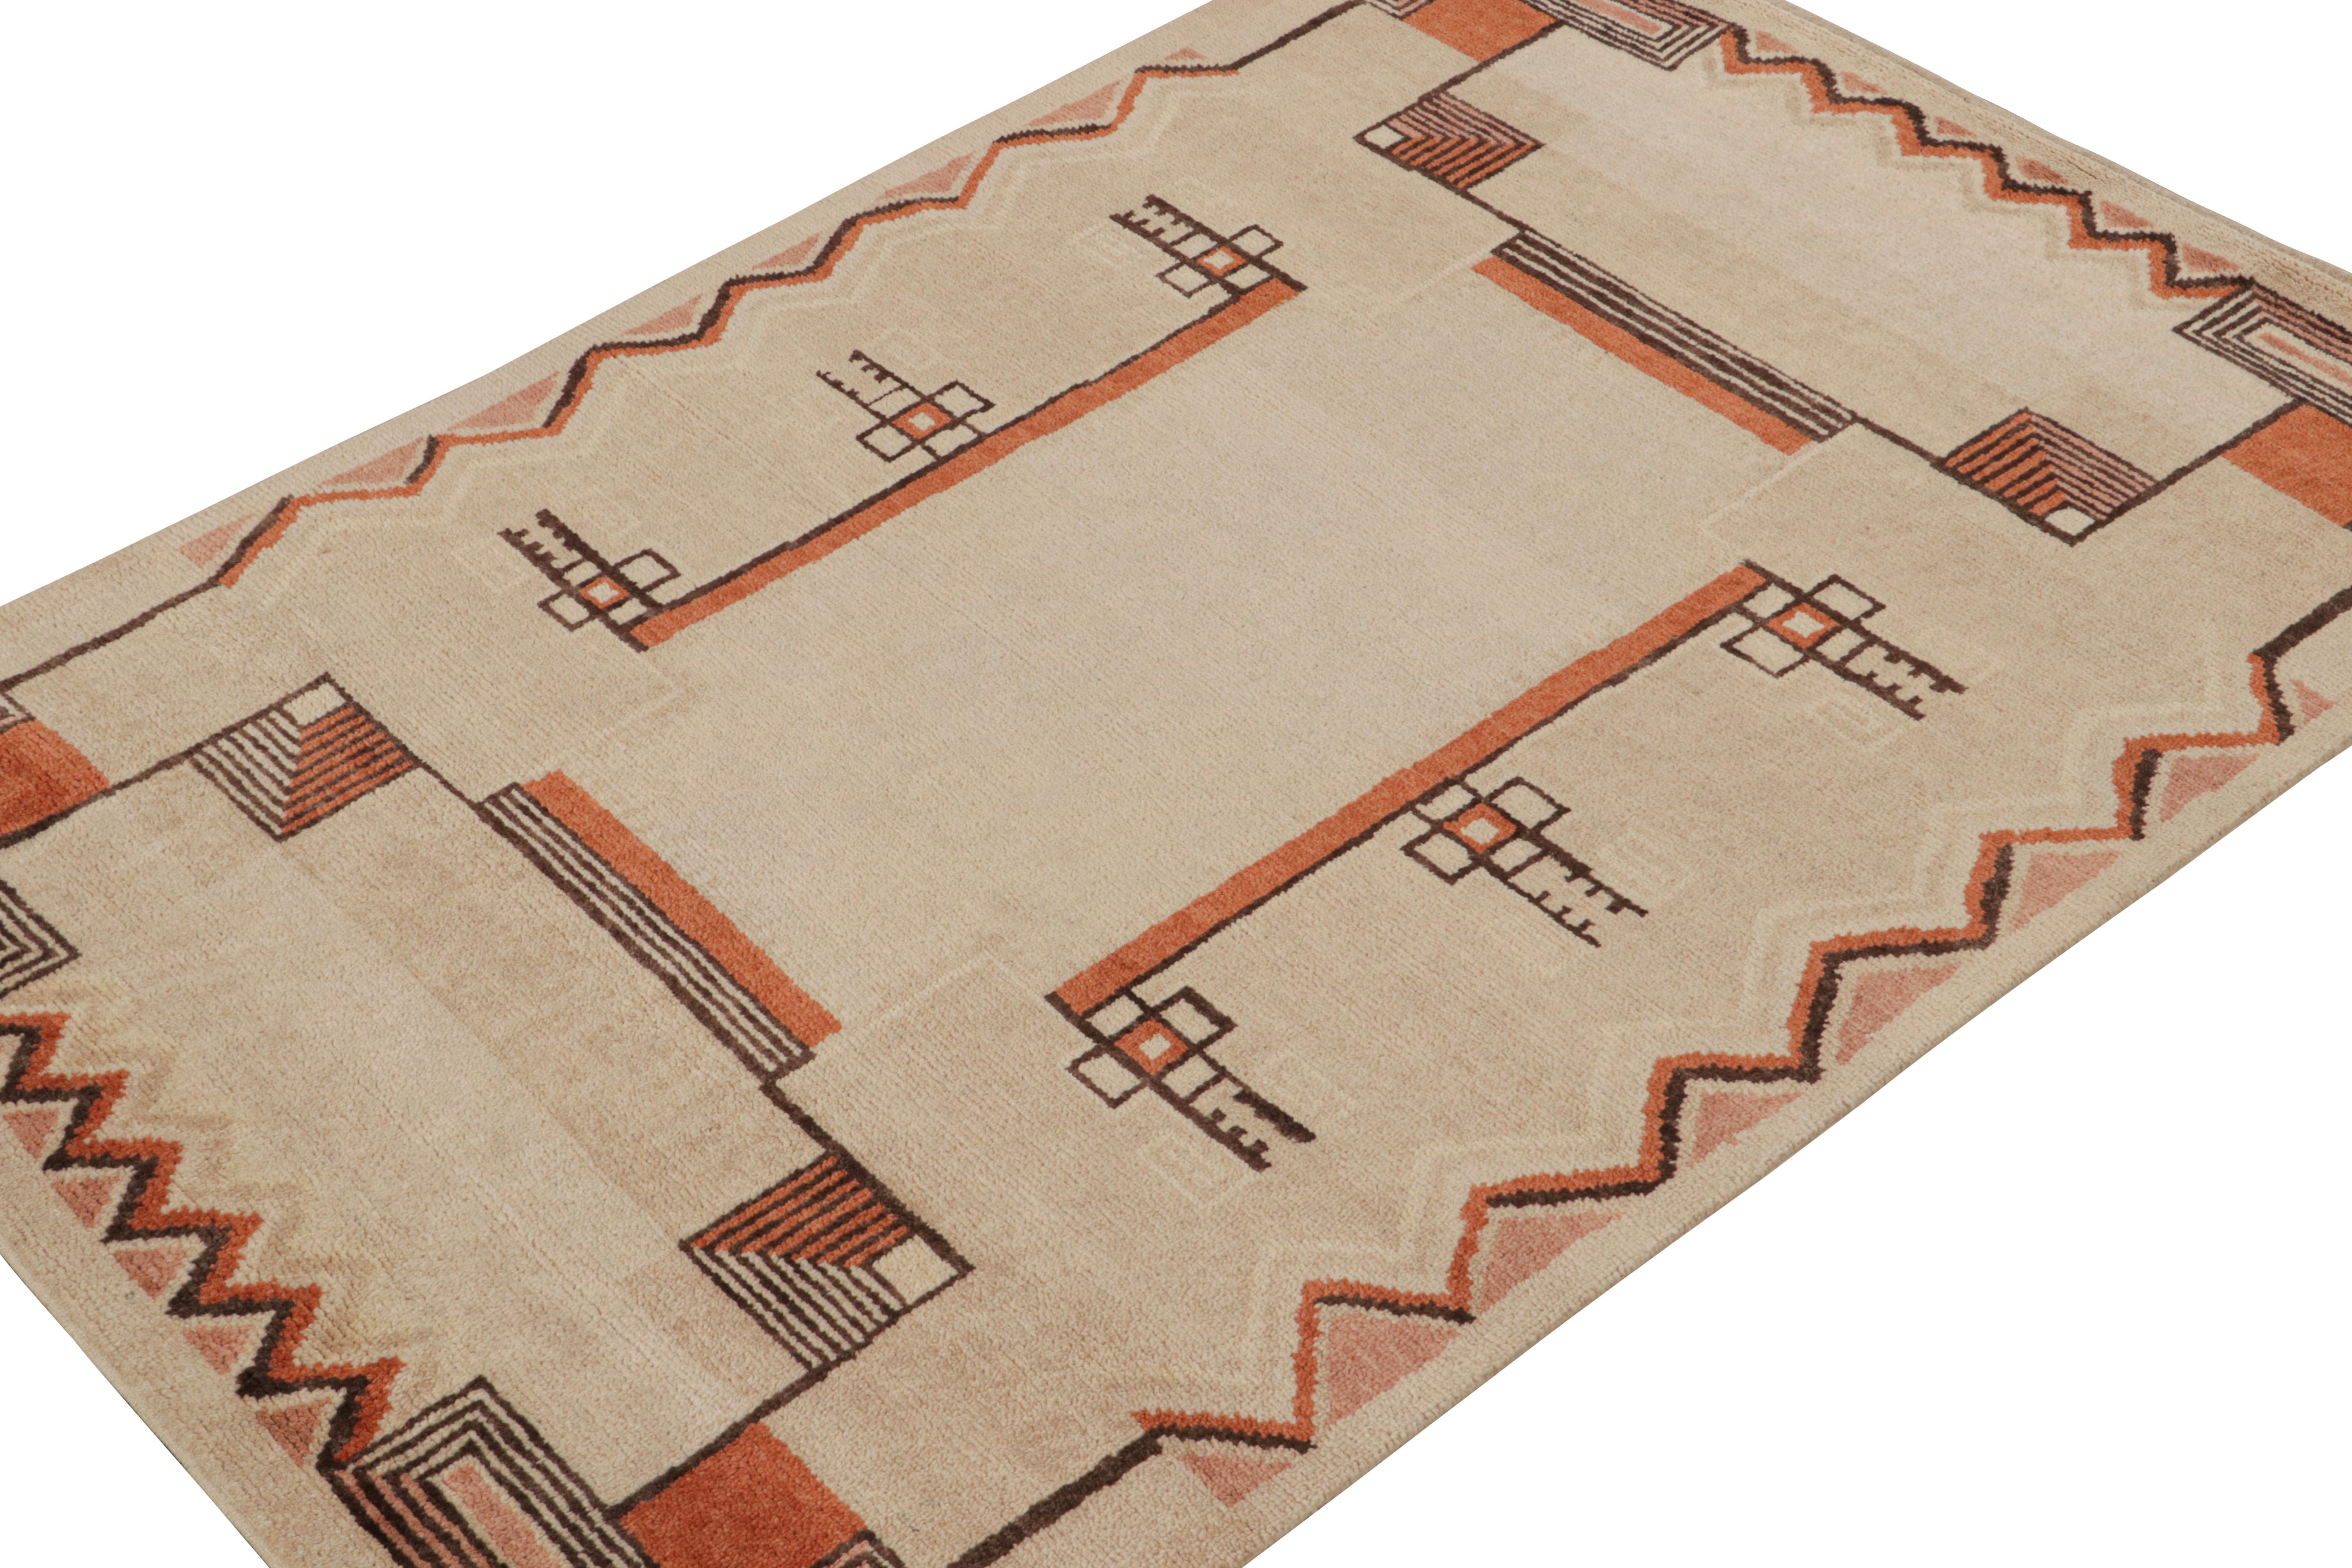 Hand knotted in wool, a 5x7 rug from Rug & Kilim’s Art Deco collection.

On the design:

This piece is a French Art Deco style rug enjoying immaculate geometric patterns in beige, brown & orange. A keen eye will note how the pattern seems to form an